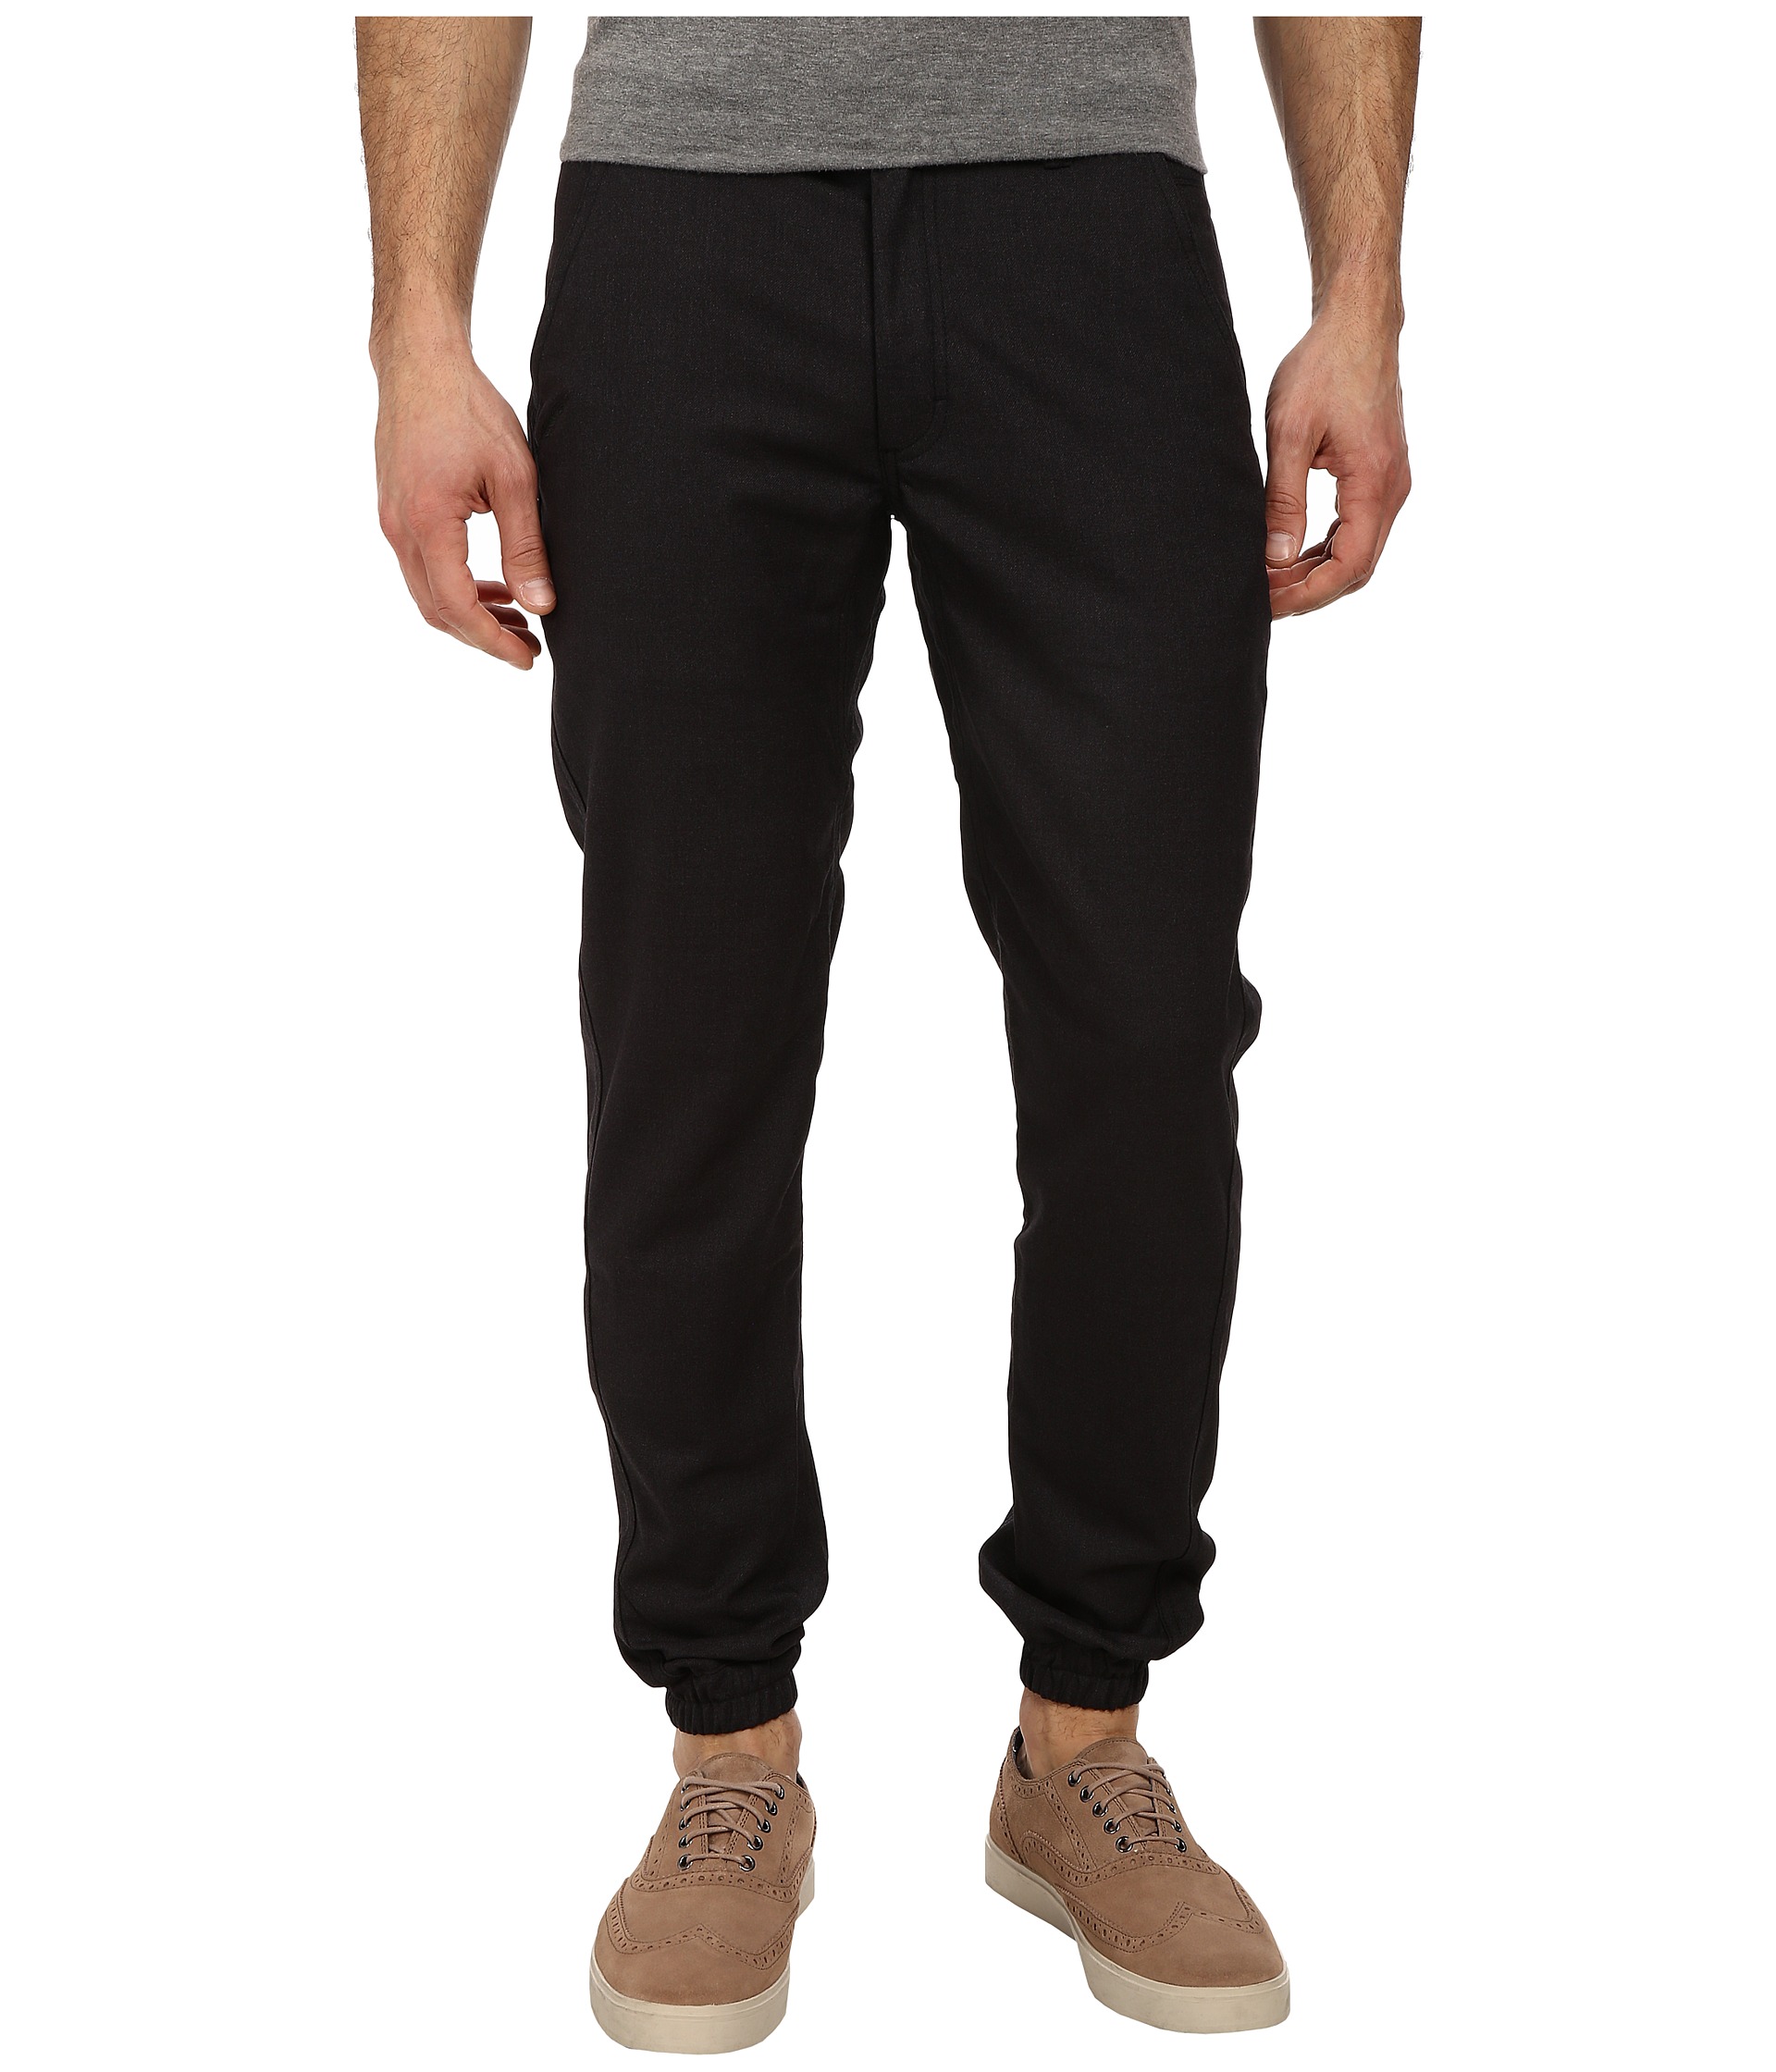 ... Stretch Twill Jogger Charcoal, Clothing | Shipped Free at Zappos